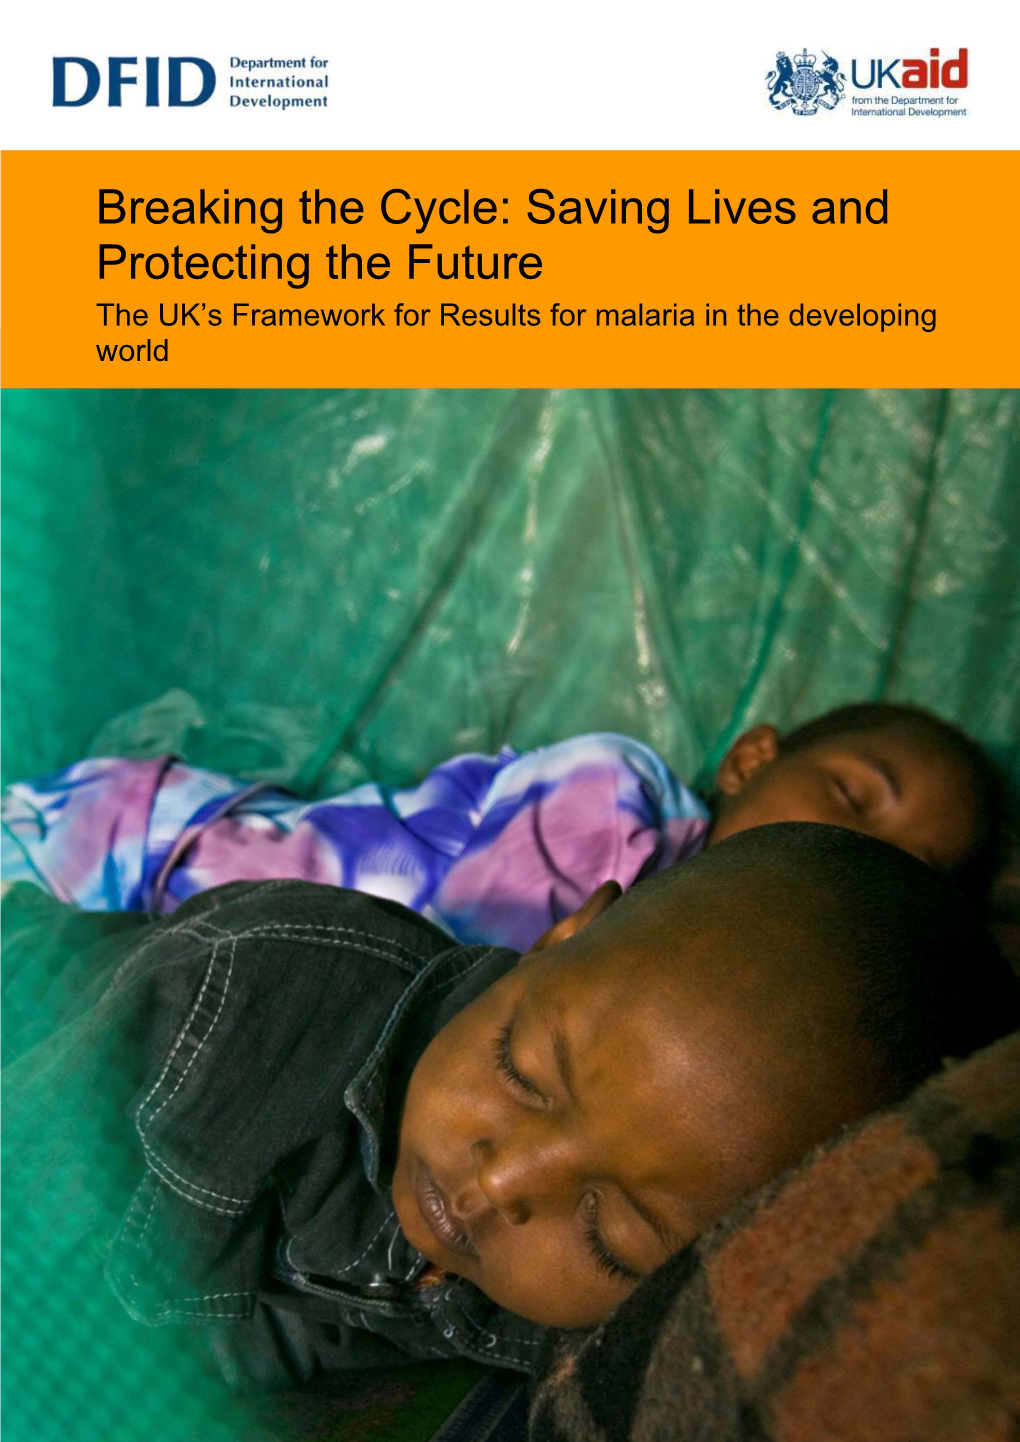 Breaking the Cycle: Saving Lives and Protecting the Future